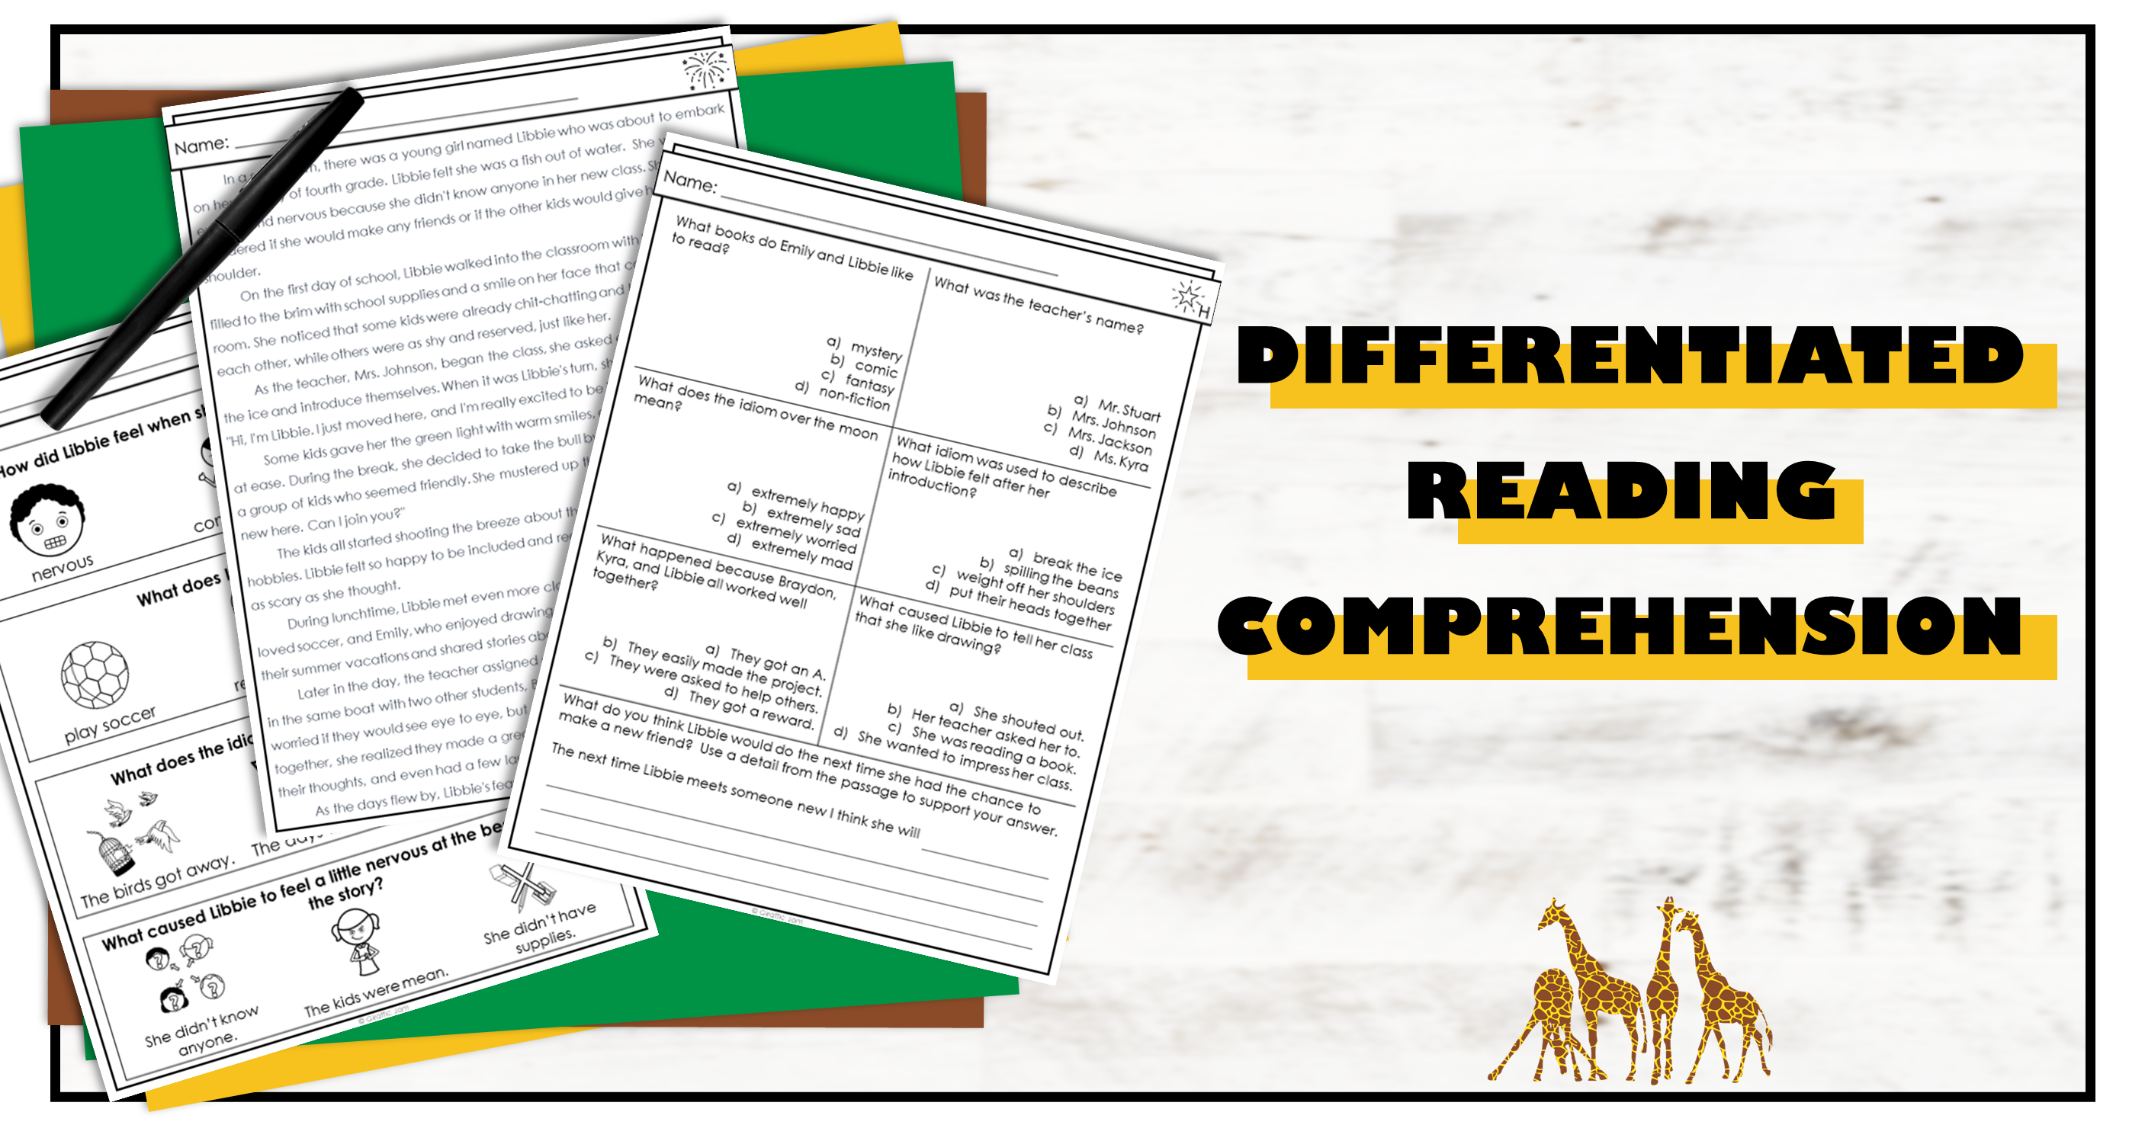 Differentiated Reading Comprehension